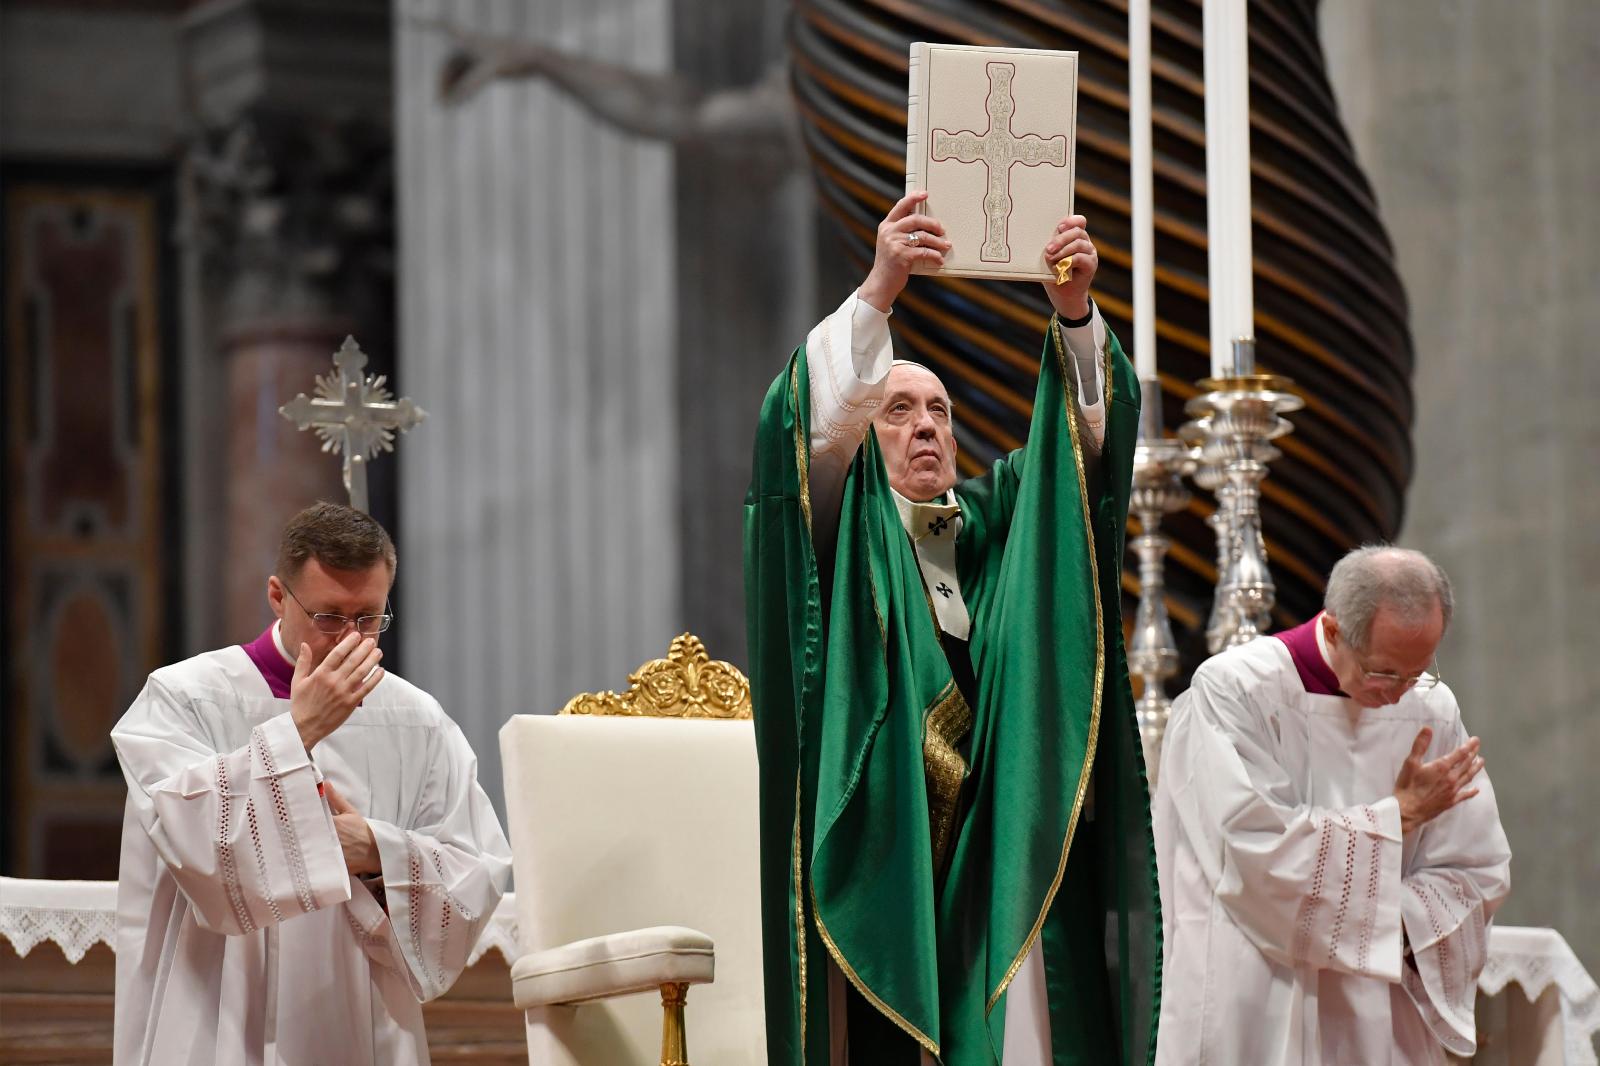 Priests warn against language of new lectionary